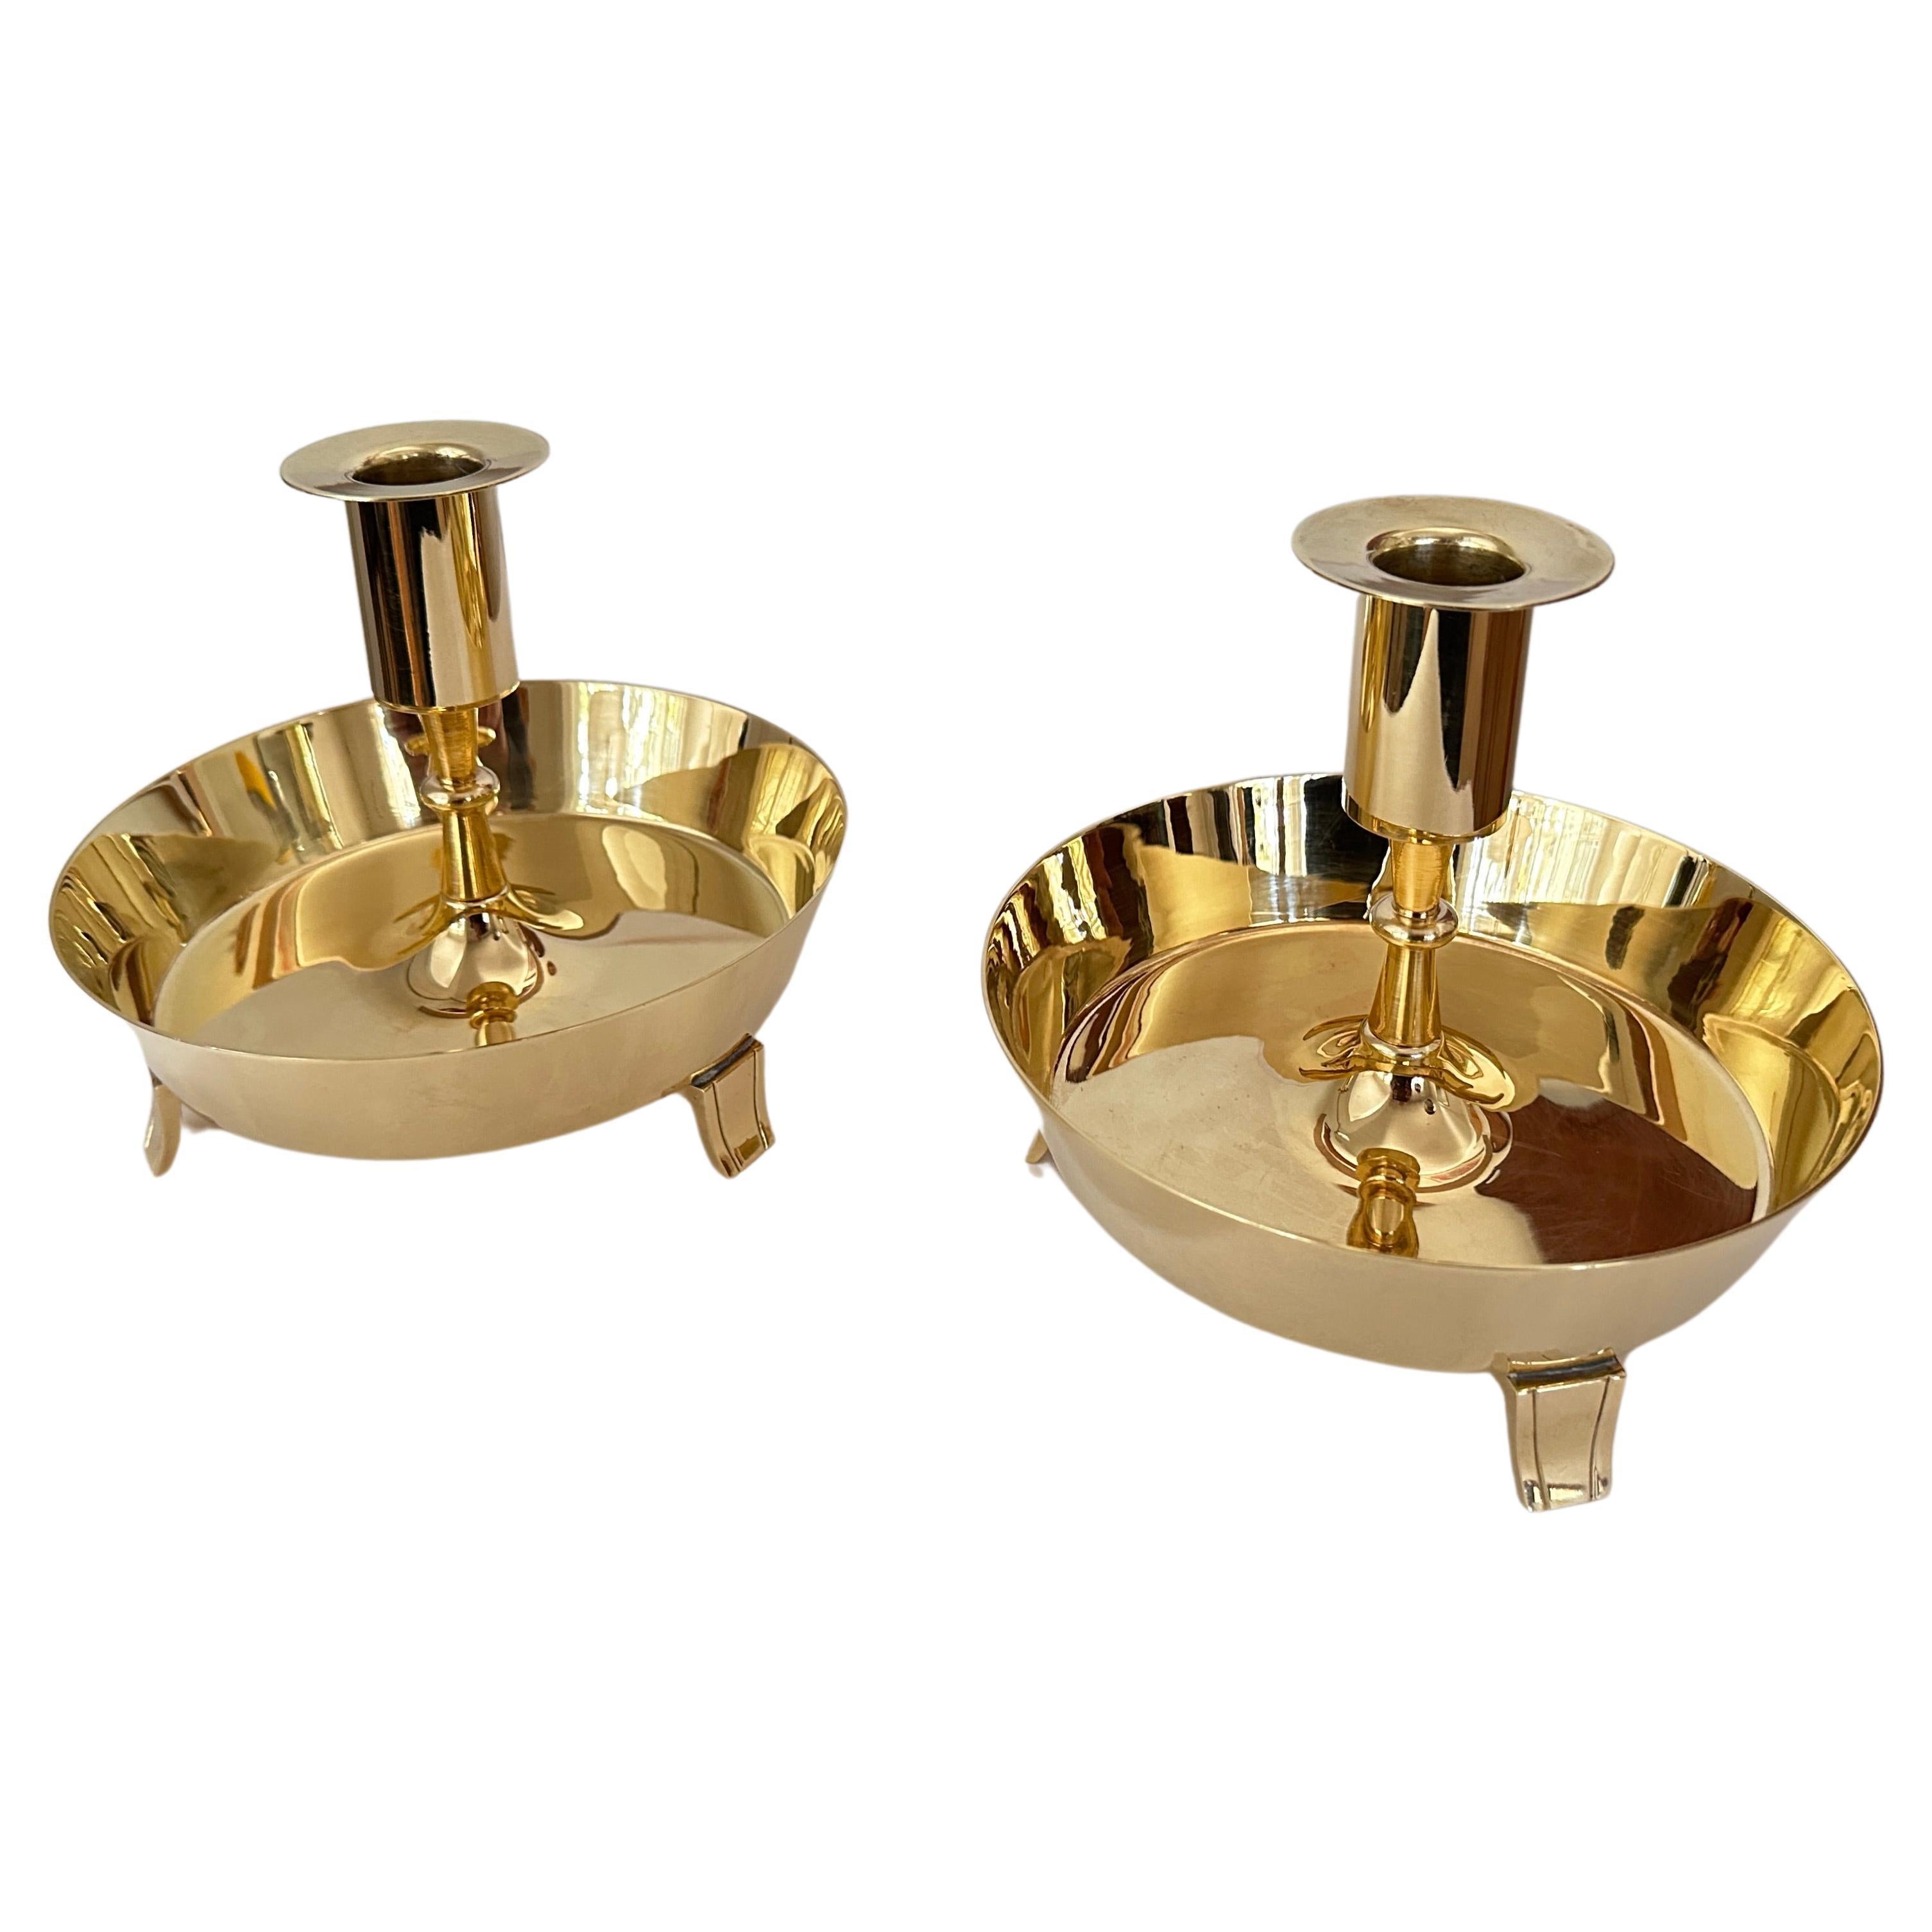 Pair of Solid Brass Candlesticks Designed by Tommi Parzinger for Dorlyn